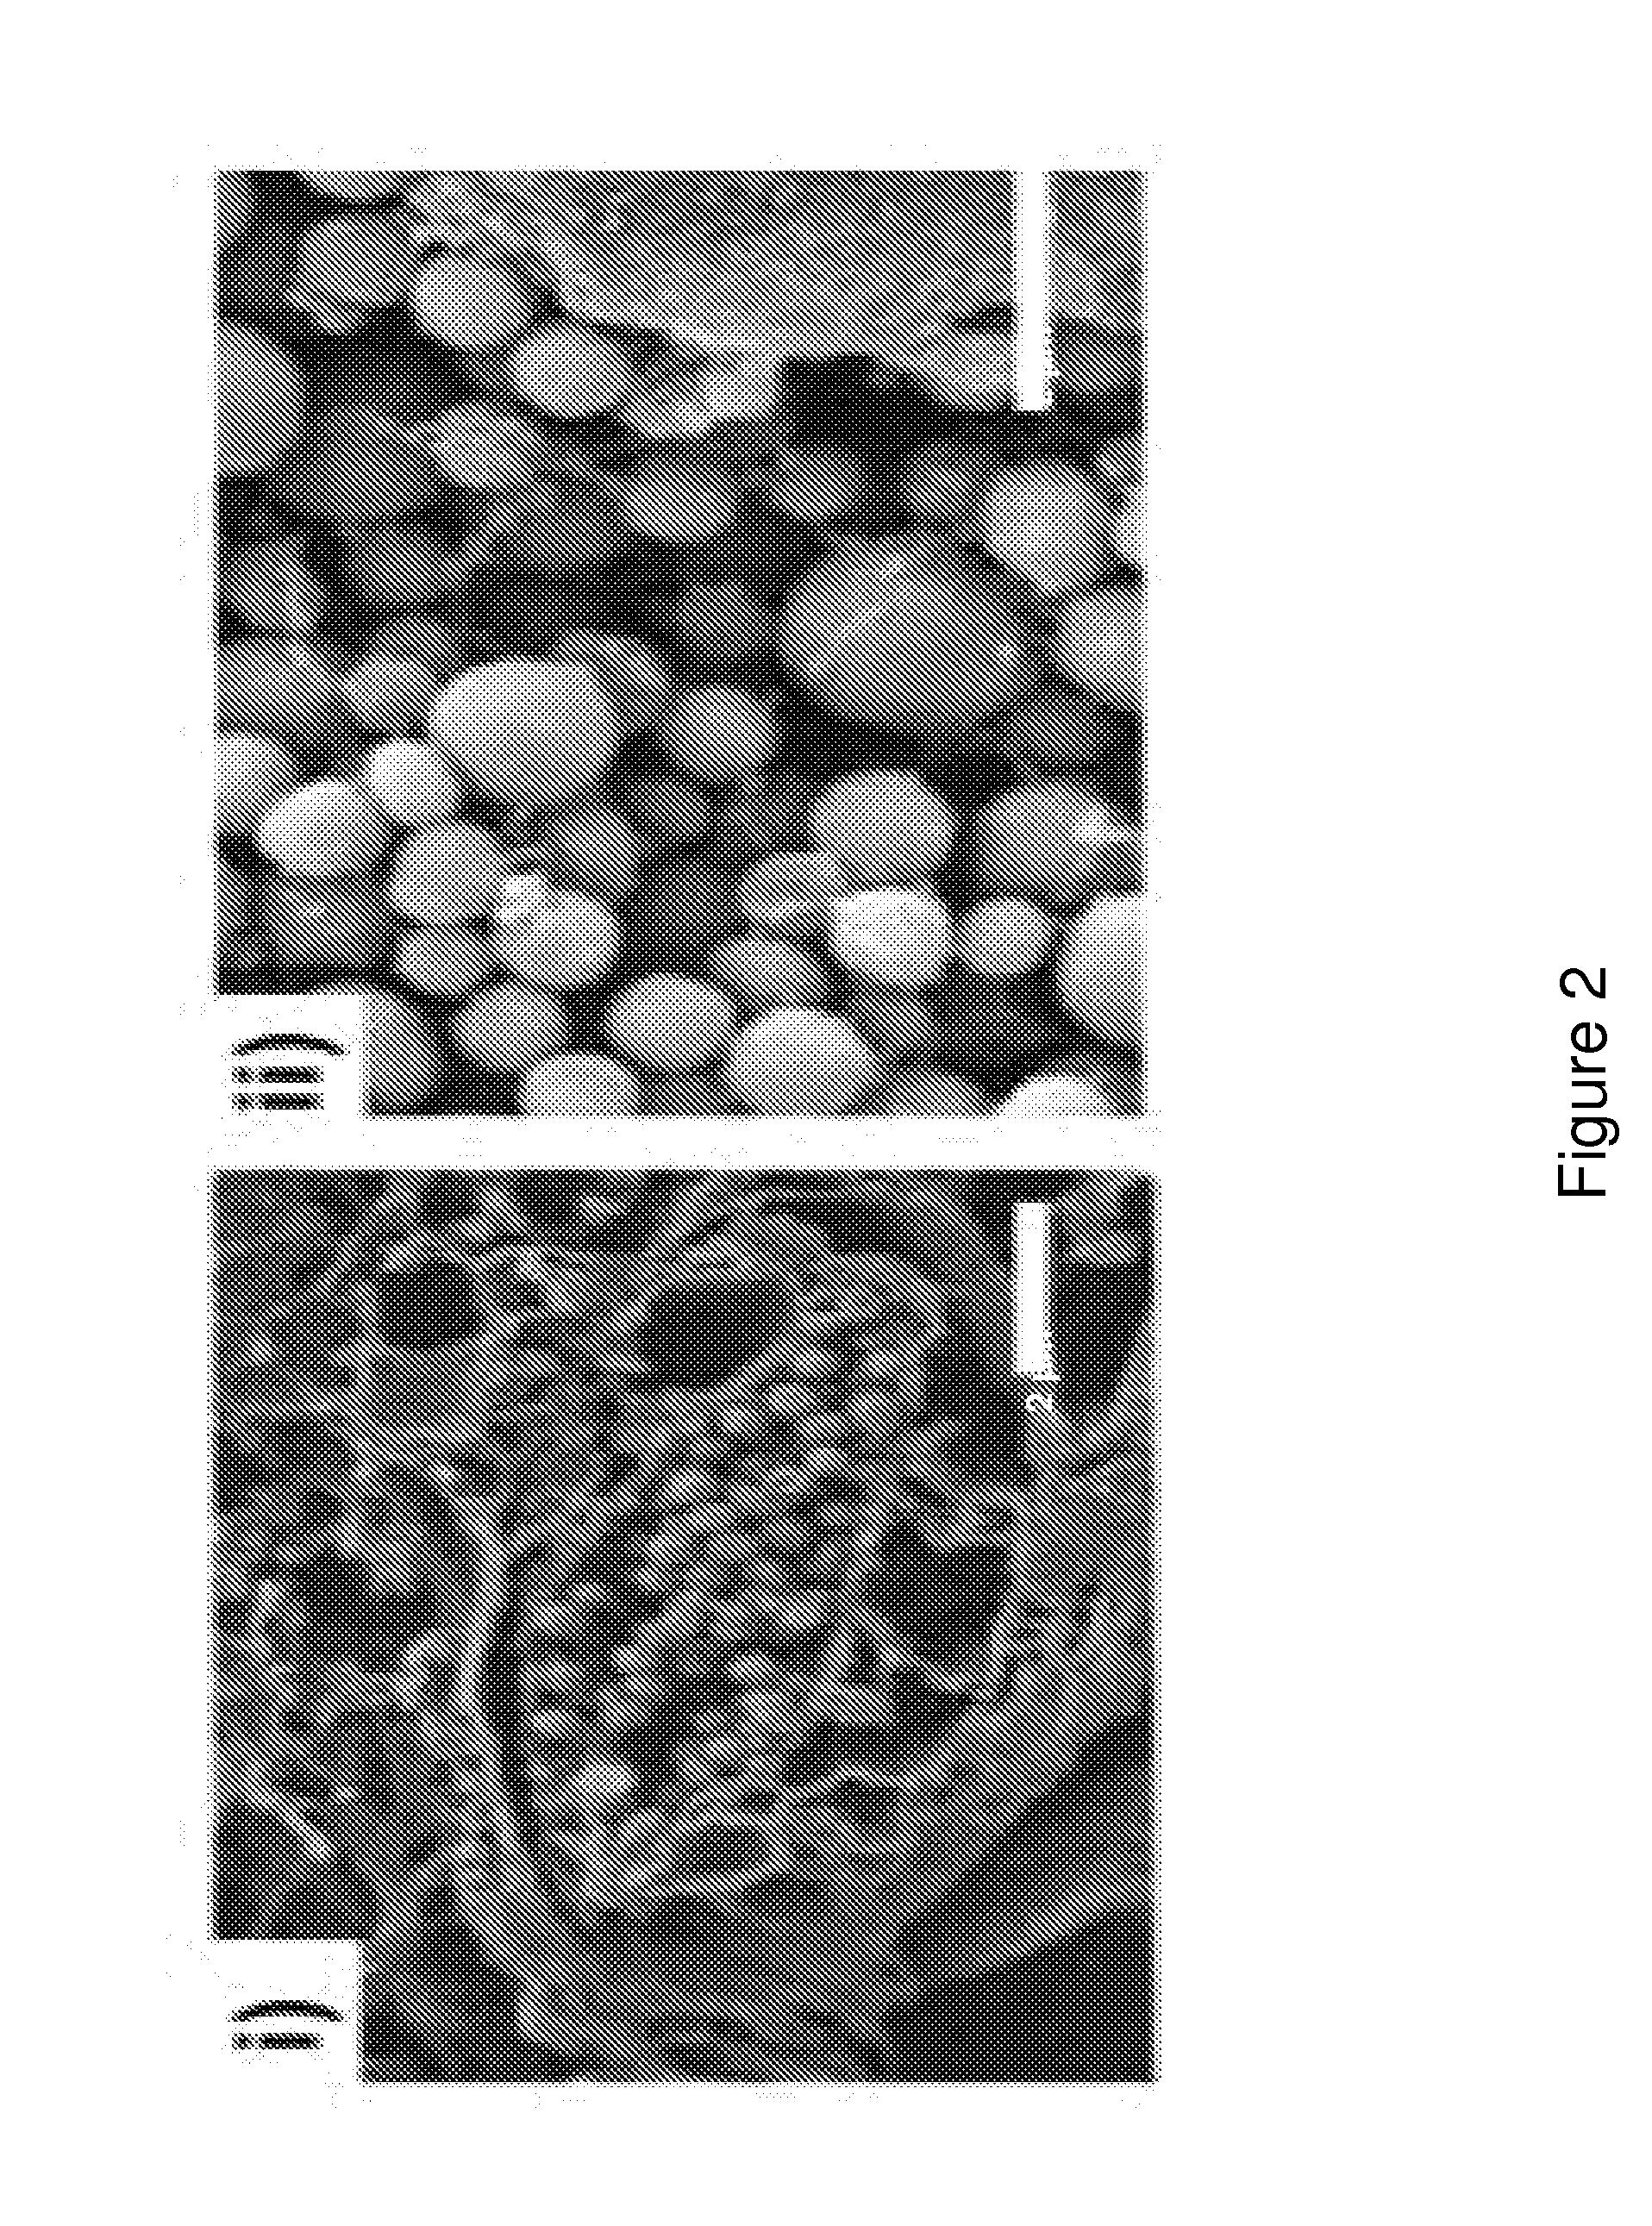 Pigment structures, pigment granules, pigment proteins, and uses thereof